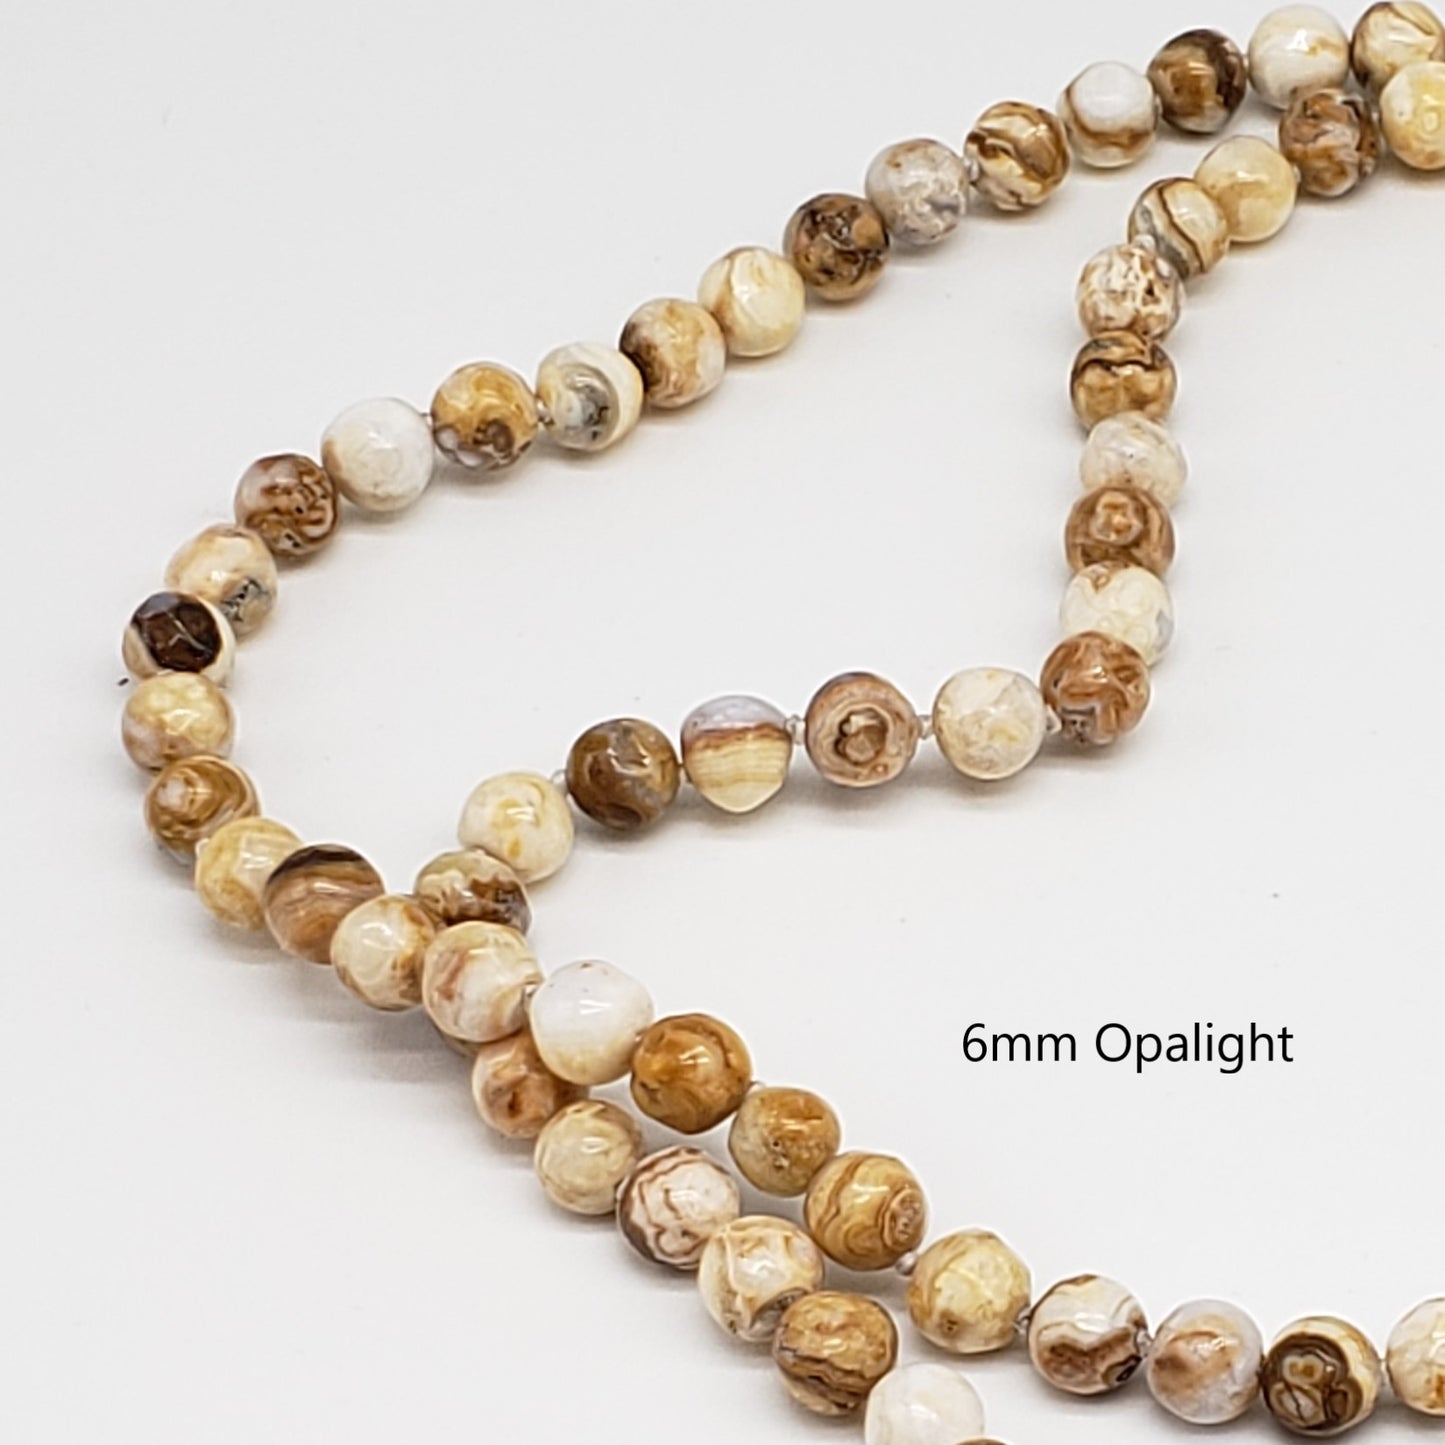 Crystal healing Opalight gemstone necklace known for resolving the karmic causes of a physical condition